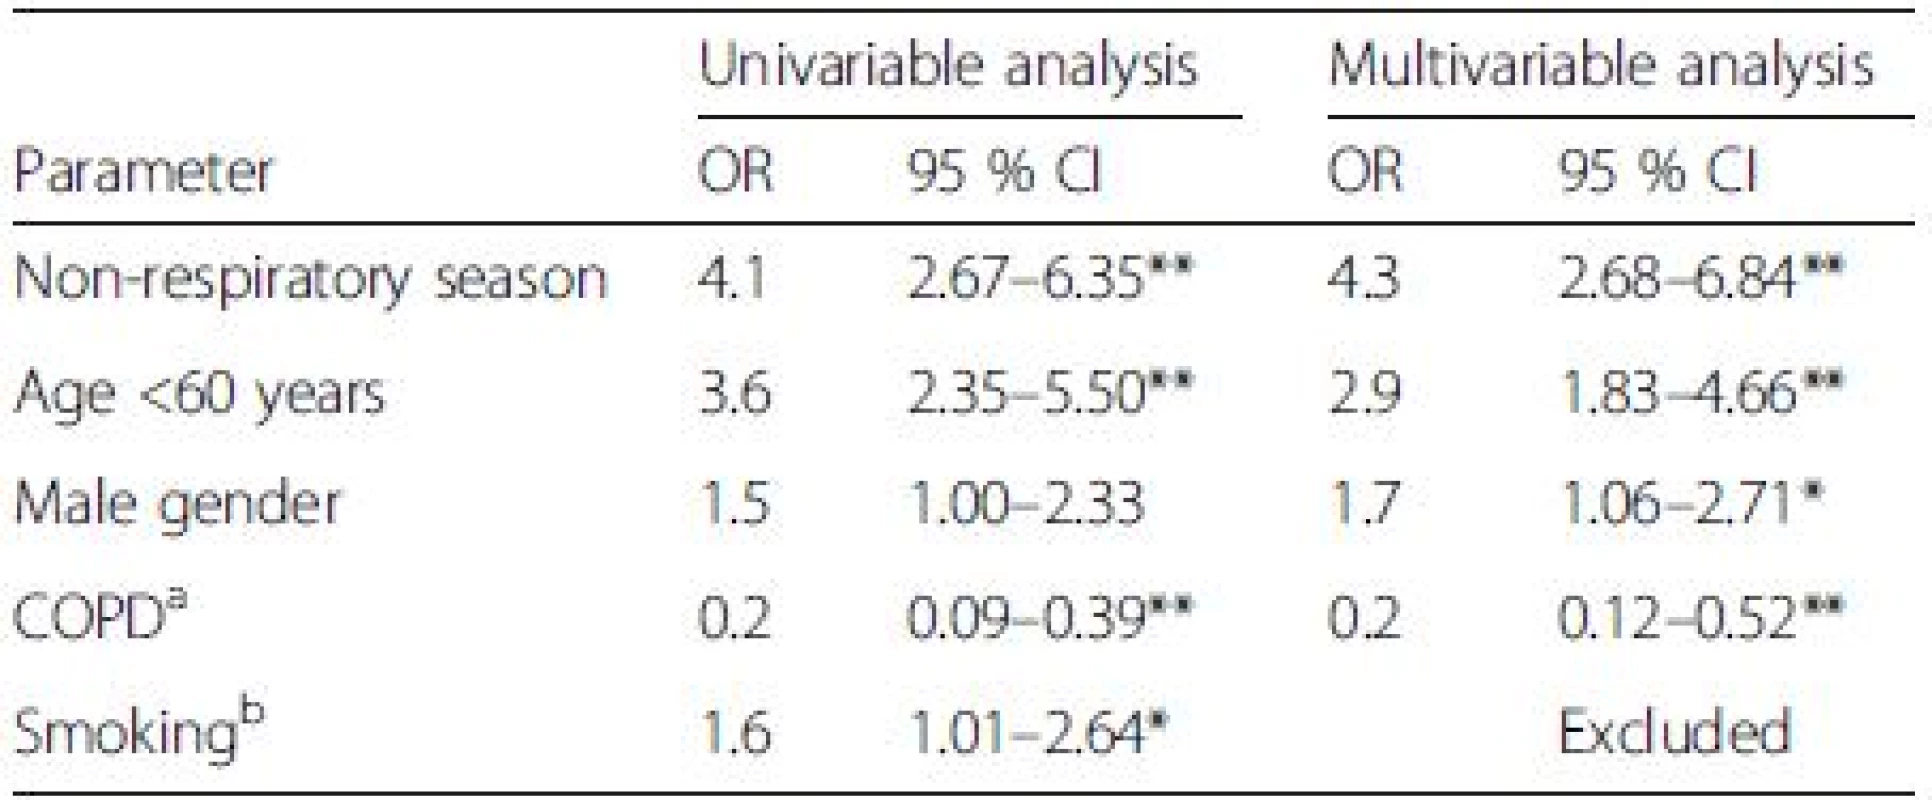 Univariable and multivariable logistic regression analysis of atypical versus other pathogens with cases with unknown aetiology excluded